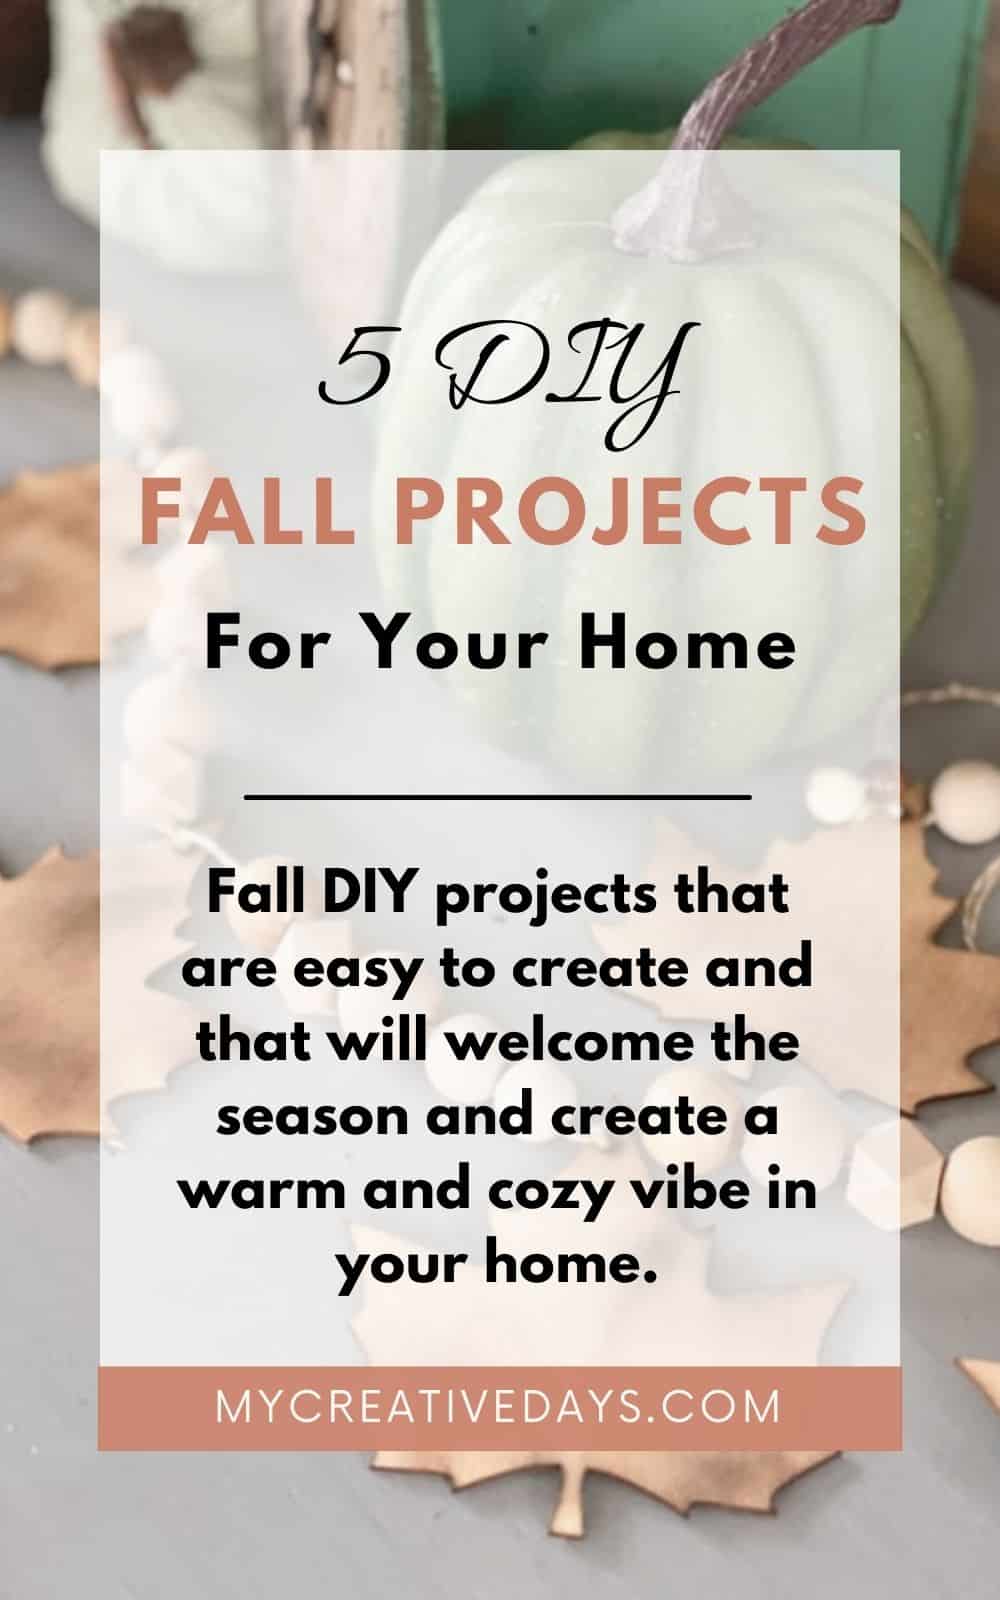 DIY fall projects that are easy to create and that will welcome the season and create a warm and cozy vibe in your home.